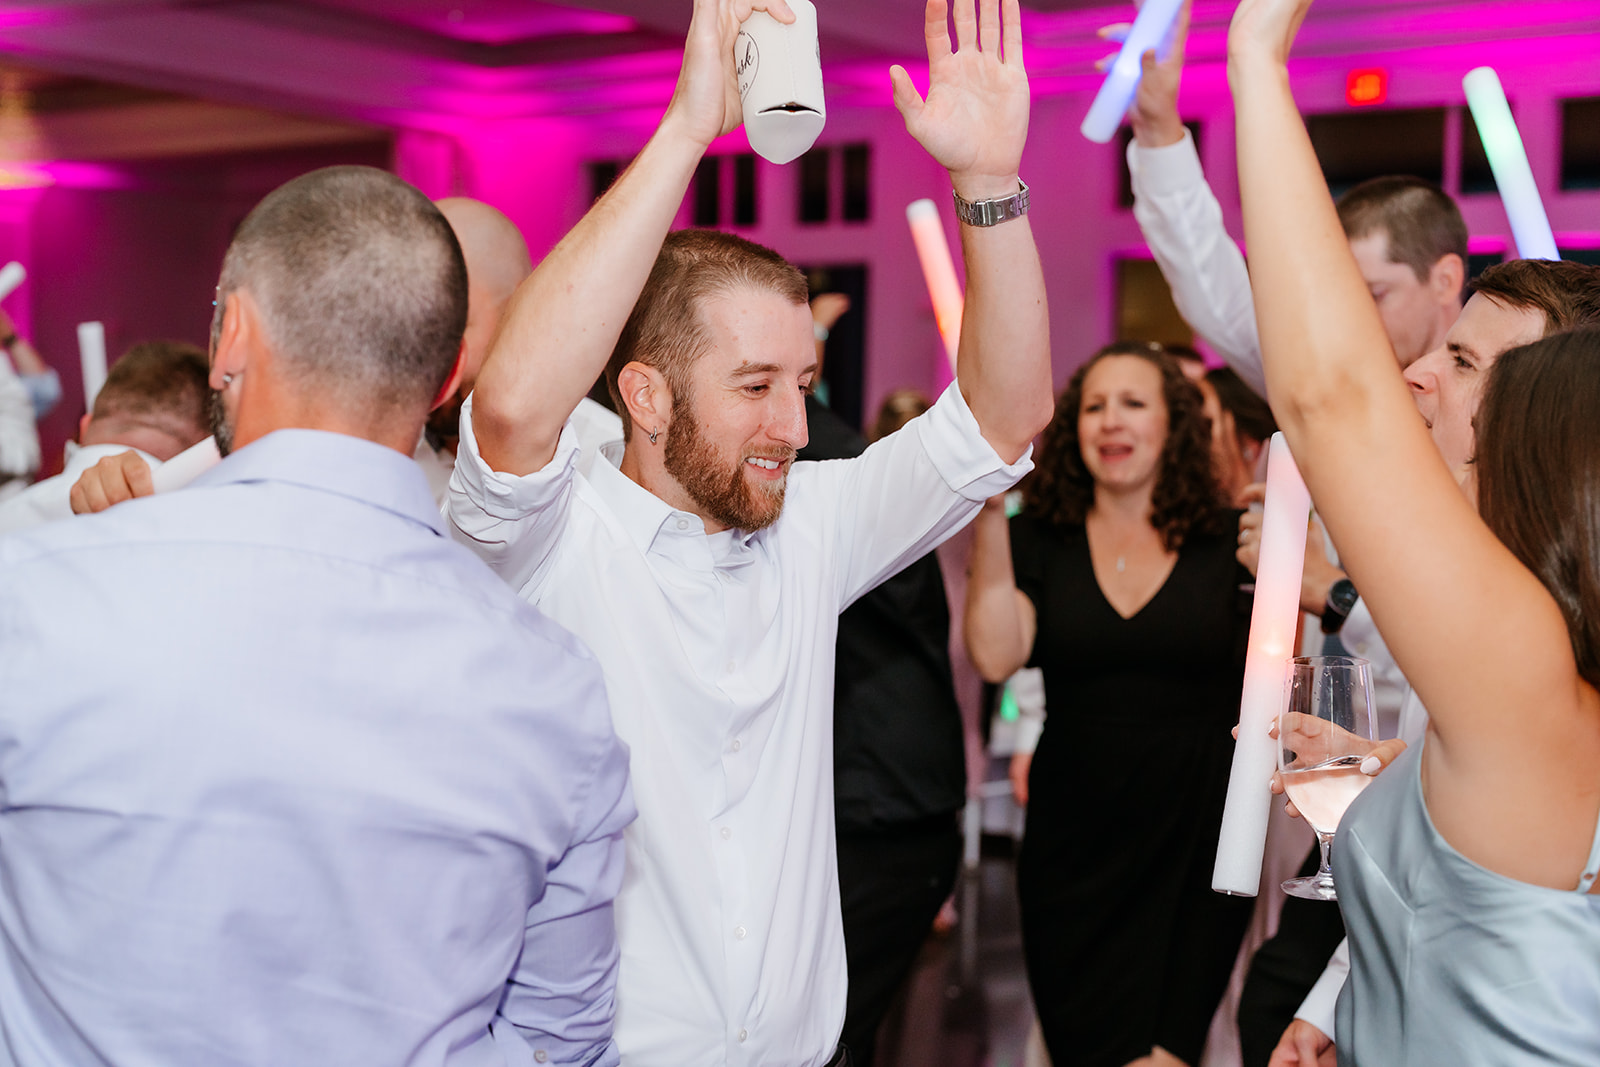 Group of people enjoying a lively celebration with high-fives and dancing in a room with pink lighting.